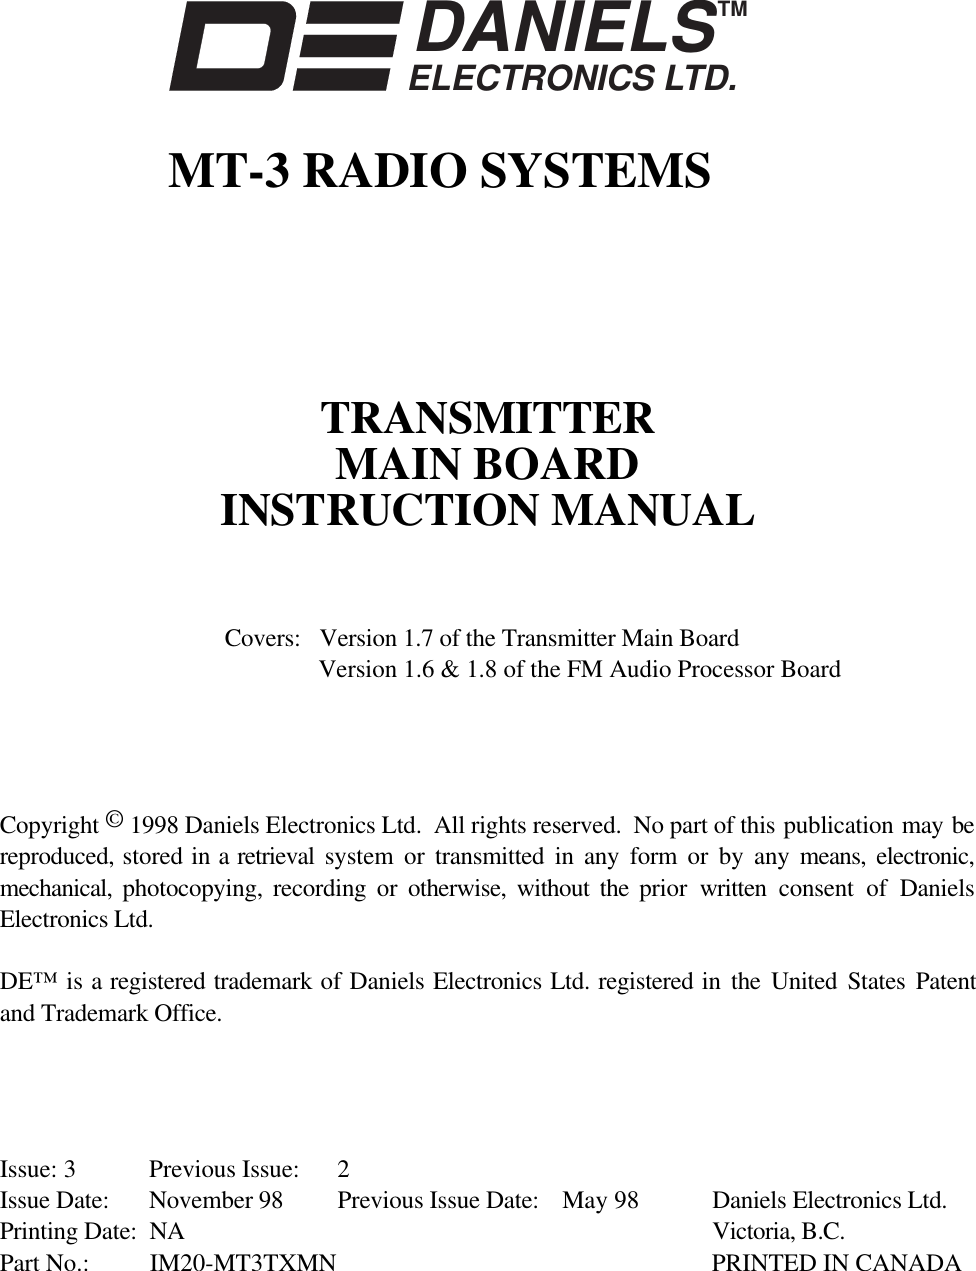 DANIELSELECTRONICS LTD.TMMT-3 RADIO SYSTEMSTRANSMITTERMAIN BOARDINSTRUCTION MANUALCovers: Version 1.7 of the Transmitter Main BoardVersion 1.6 &amp; 1.8 of the FM Audio Processor BoardCopyright © 1998 Daniels Electronics Ltd.  All rights reserved.  No part of this publication may bereproduced, stored in a retrieval  system or transmitted in any form or by any means, electronic,mechanical,  photocopying, recording or otherwise, without the prior  written consent of DanielsElectronics Ltd.DE™ is a registered trademark of Daniels Electronics Ltd. registered in the United States Patentand Trademark Office.Issue: 3 Previous Issue: 2Issue Date: November 98 Previous Issue Date: May 98 Daniels Electronics Ltd.Printing Date: NA Victoria, B.C.Part No.: IM20-MT3TXMN PRINTED IN CANADA